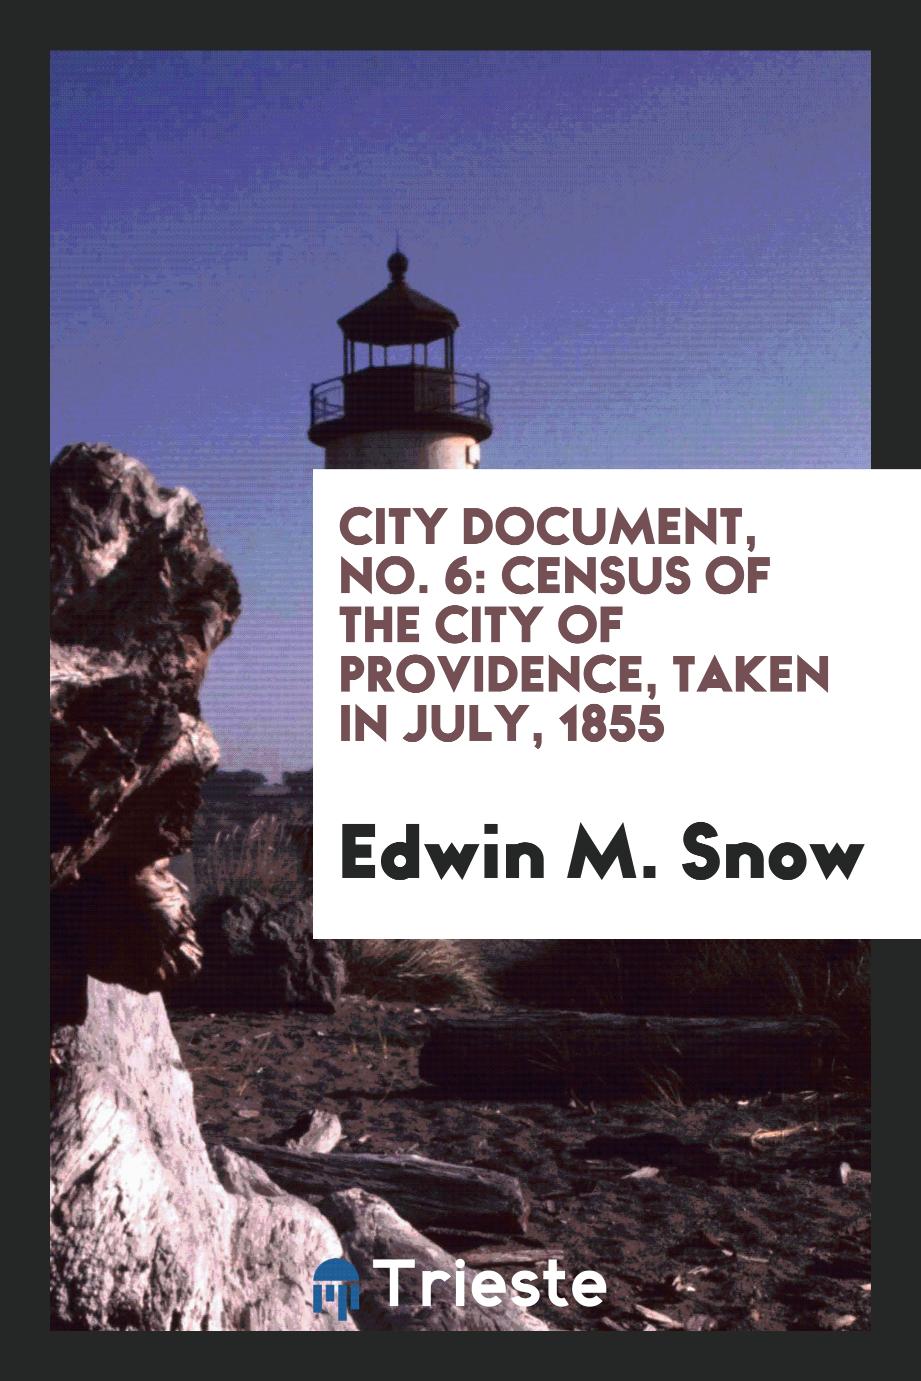 City Document, No. 6: Census of the City of Providence, Taken in July, 1855